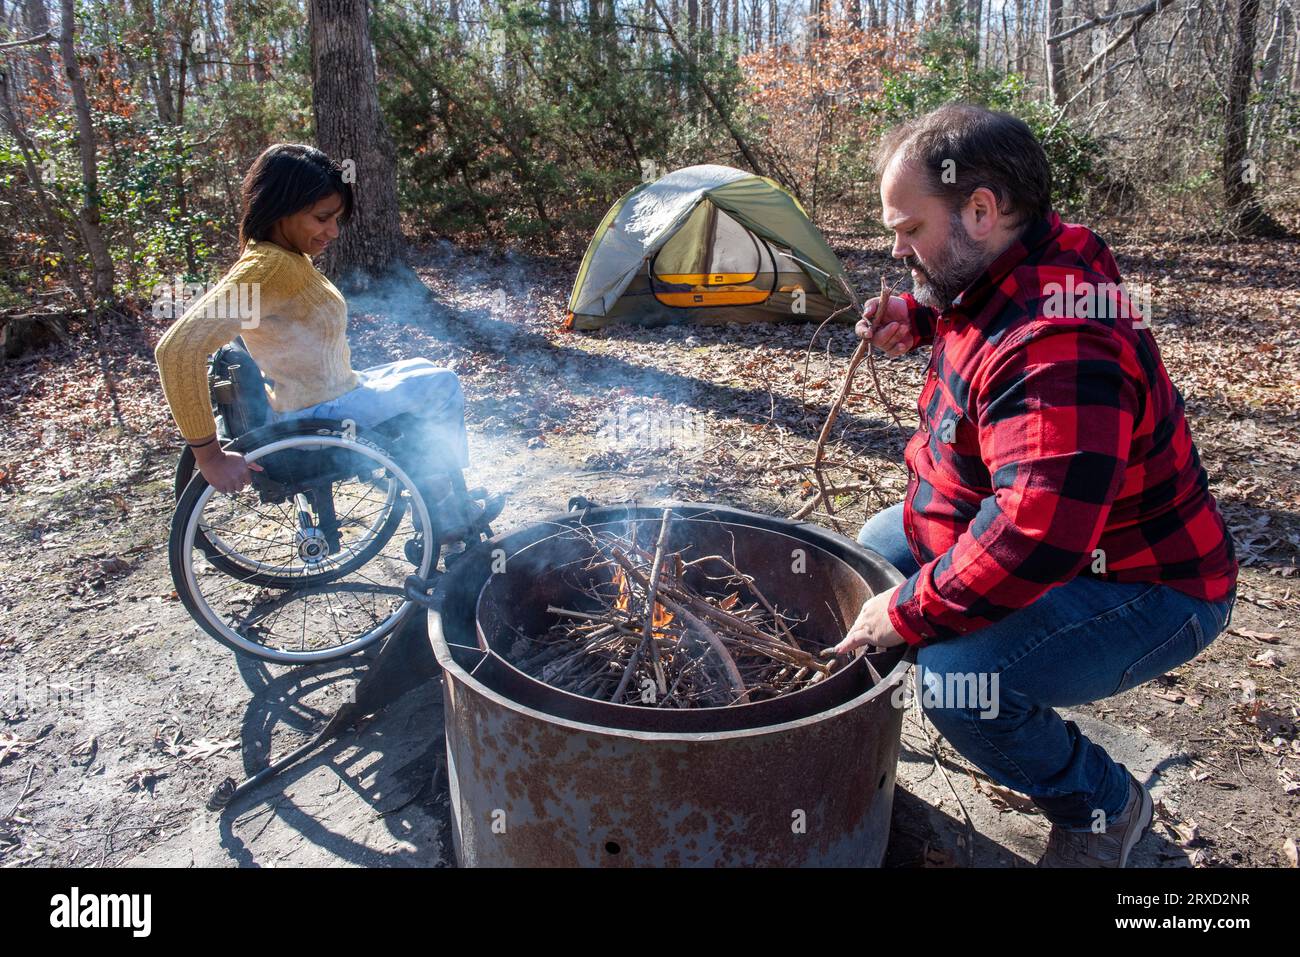 An outdoorsy couple starts a campfire at their campsite. Both are disabled but love the outdoors. Stock Photo